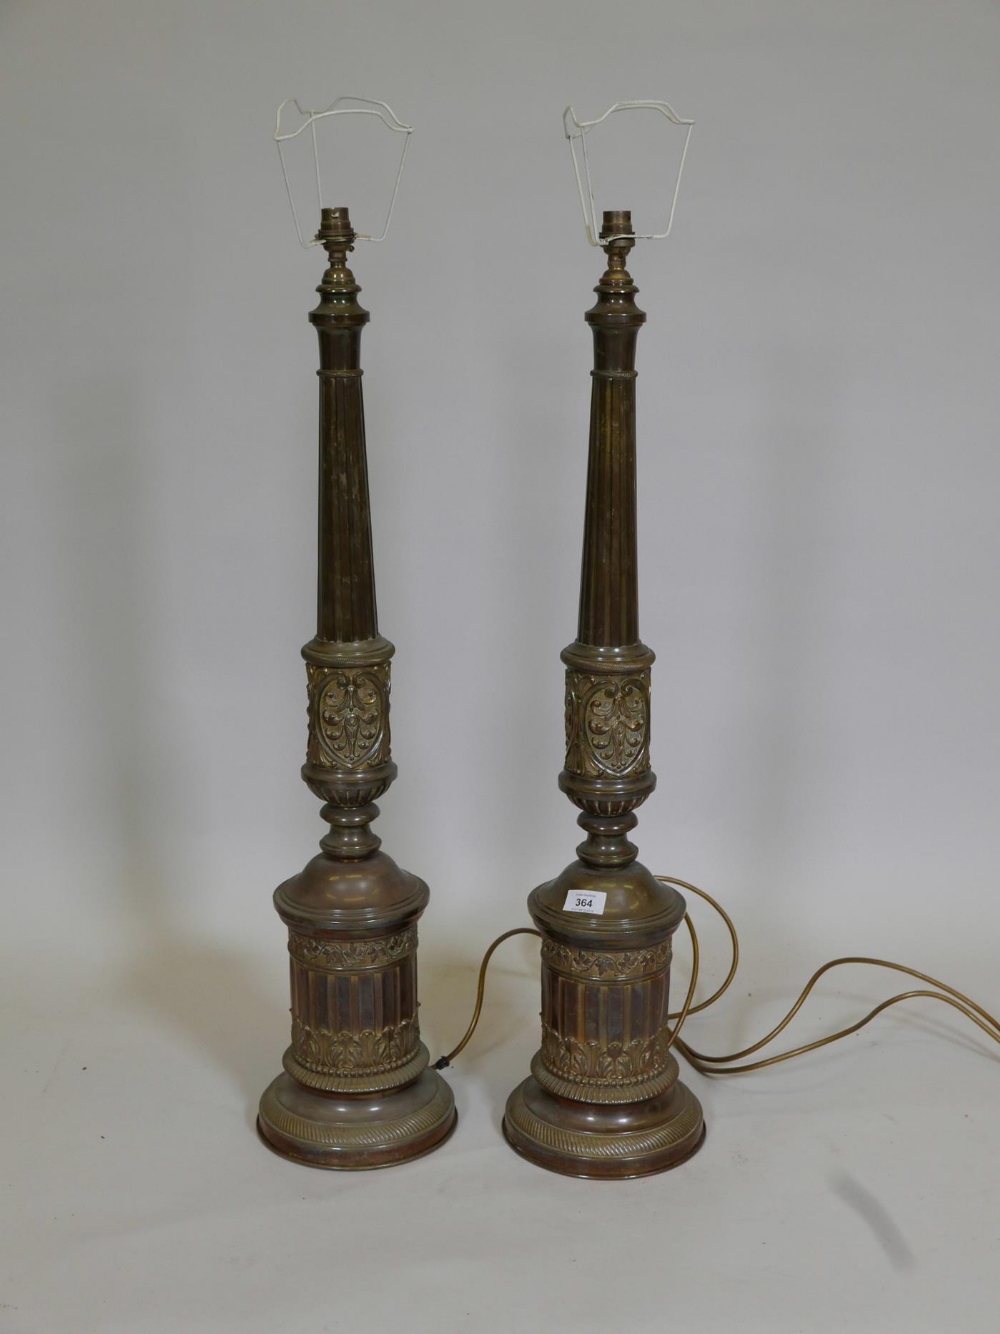 A pair of brass table lamps with repoussé classical decoration, 34" high